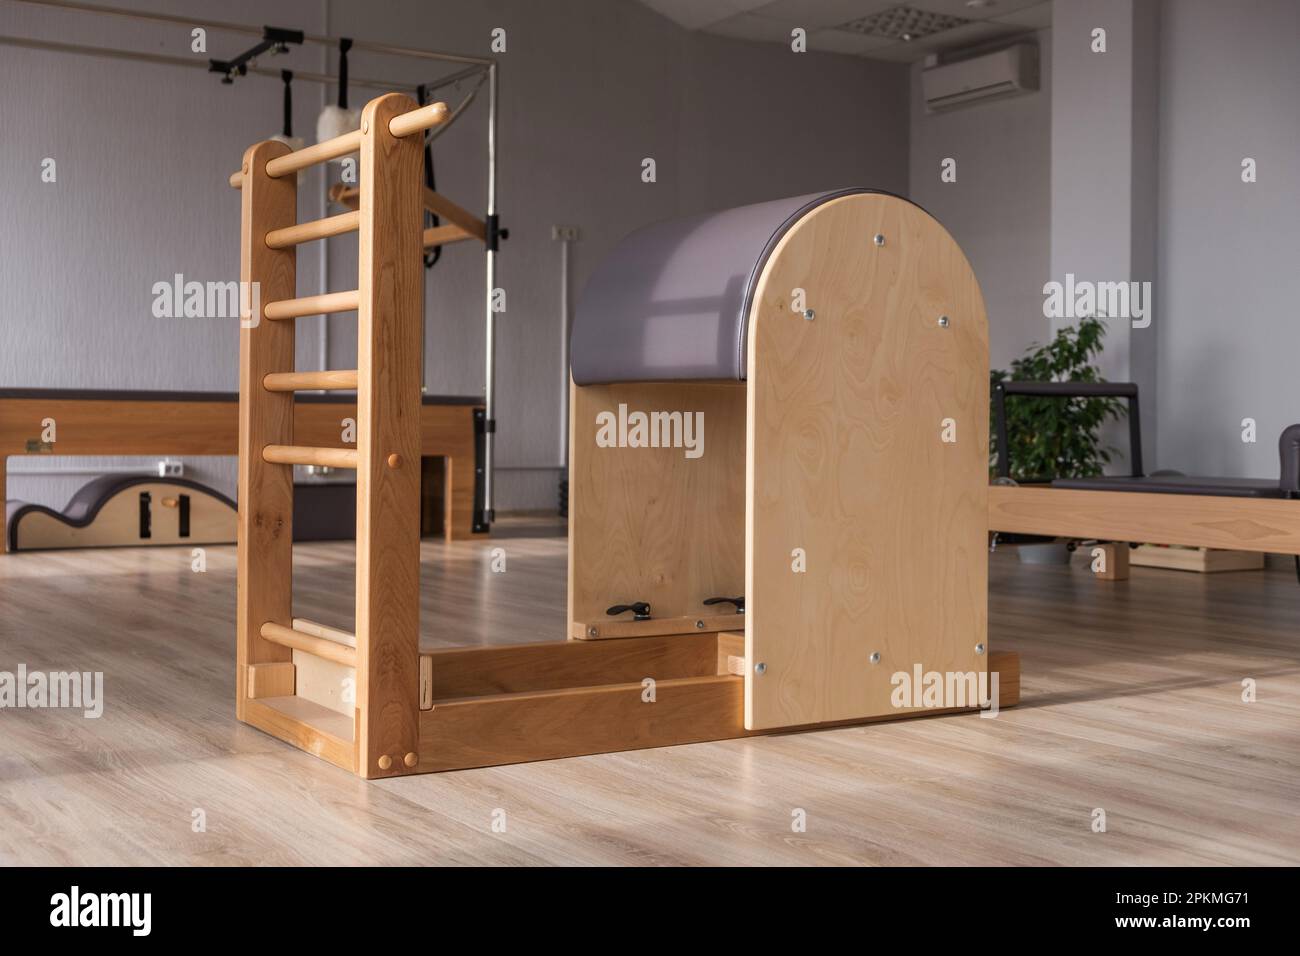 https://c8.alamy.com/comp/2PKMG71/pilates-equipment-balanced-body-ladder-barrel-pilates-studio-machine-for-fitness-workouts-in-gym-fit-healthy-and-strong-authentical-body-fitness-2PKMG71.jpg